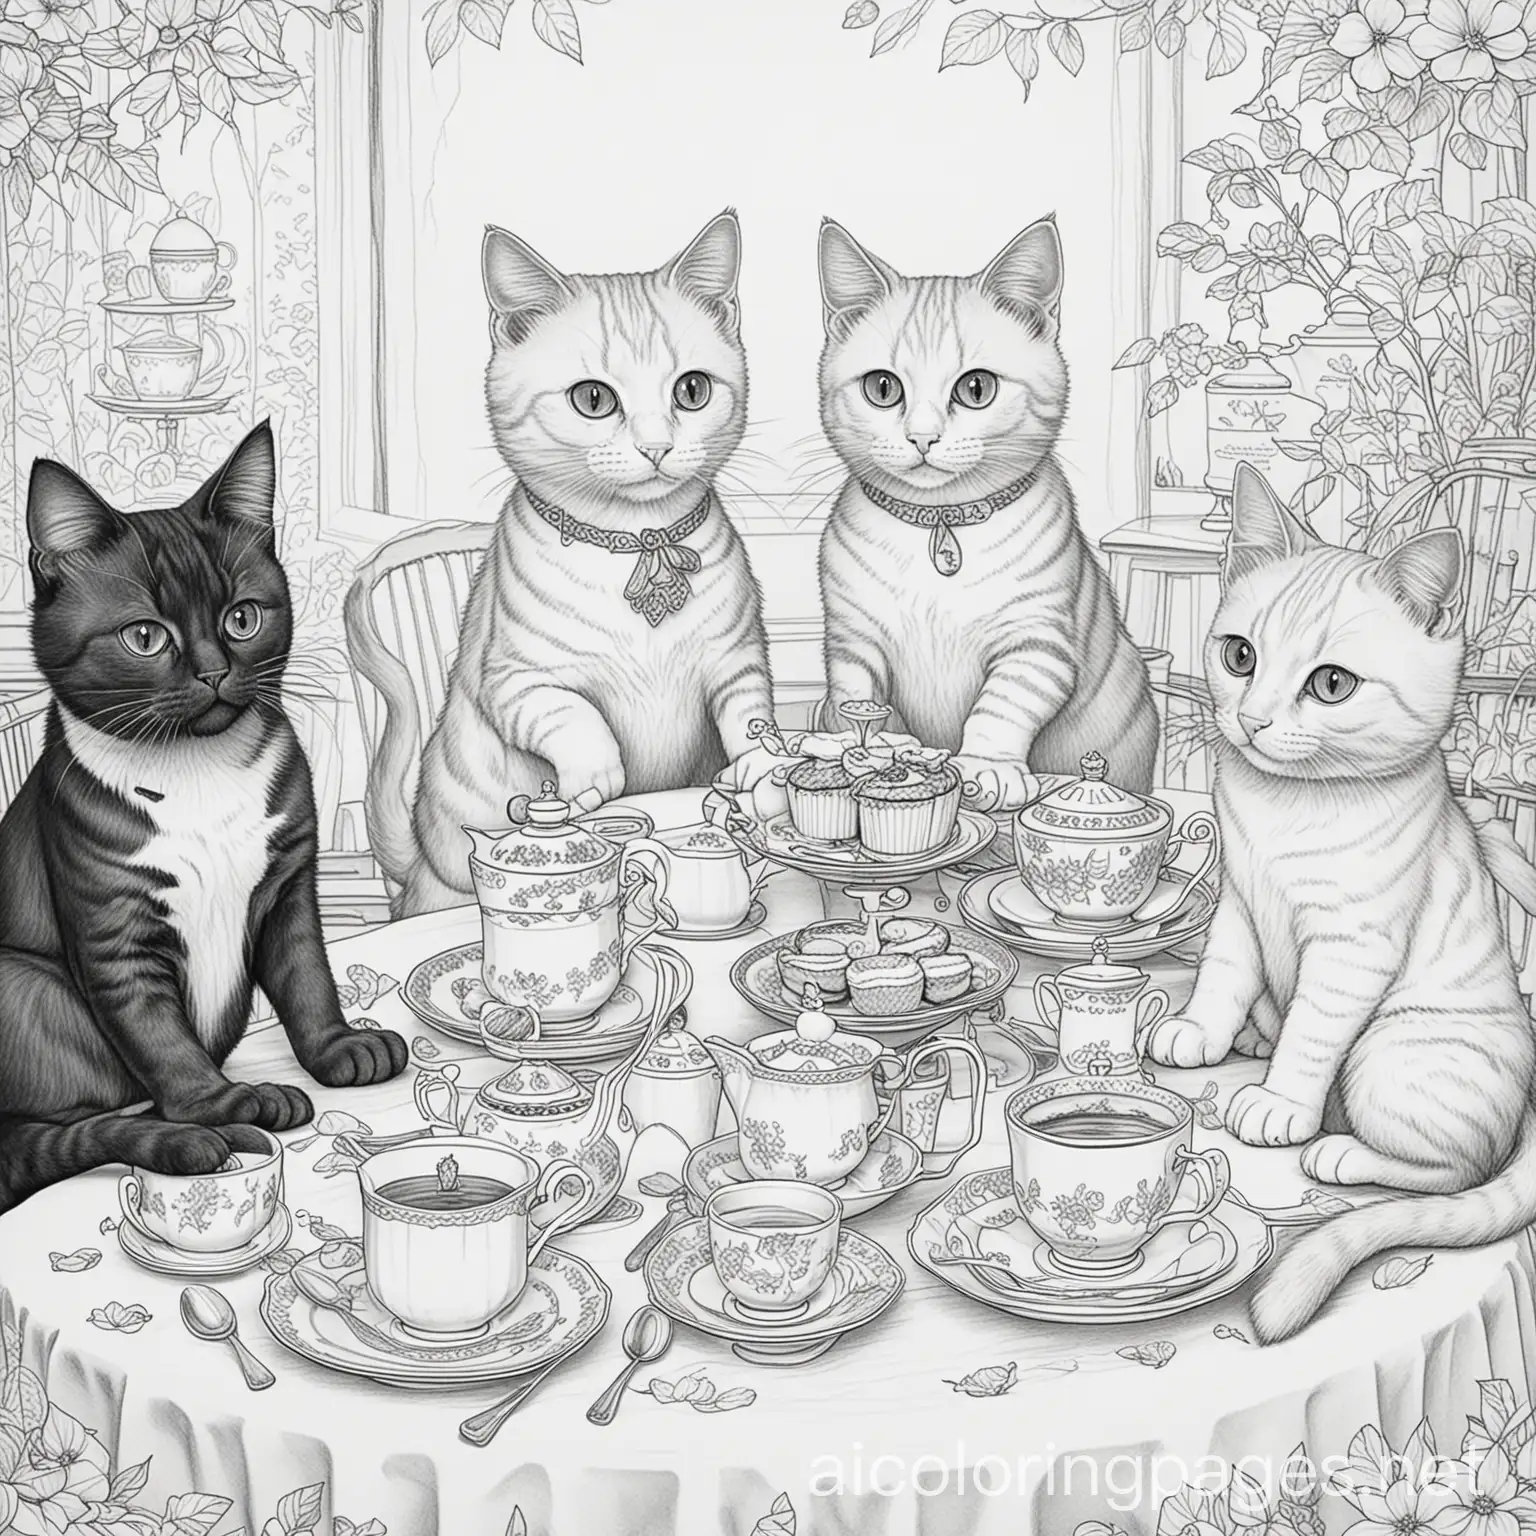 Generate a coloring page with cats at a tea party with exactly 97 pieces to color, Coloring Page, black and white, line art, white background, Simplicity, Ample White Space. The background of the coloring page is plain white to make it easy for young children to color within the lines. The outlines of all the subjects are easy to distinguish, making it simple for kids to color without too much difficulty